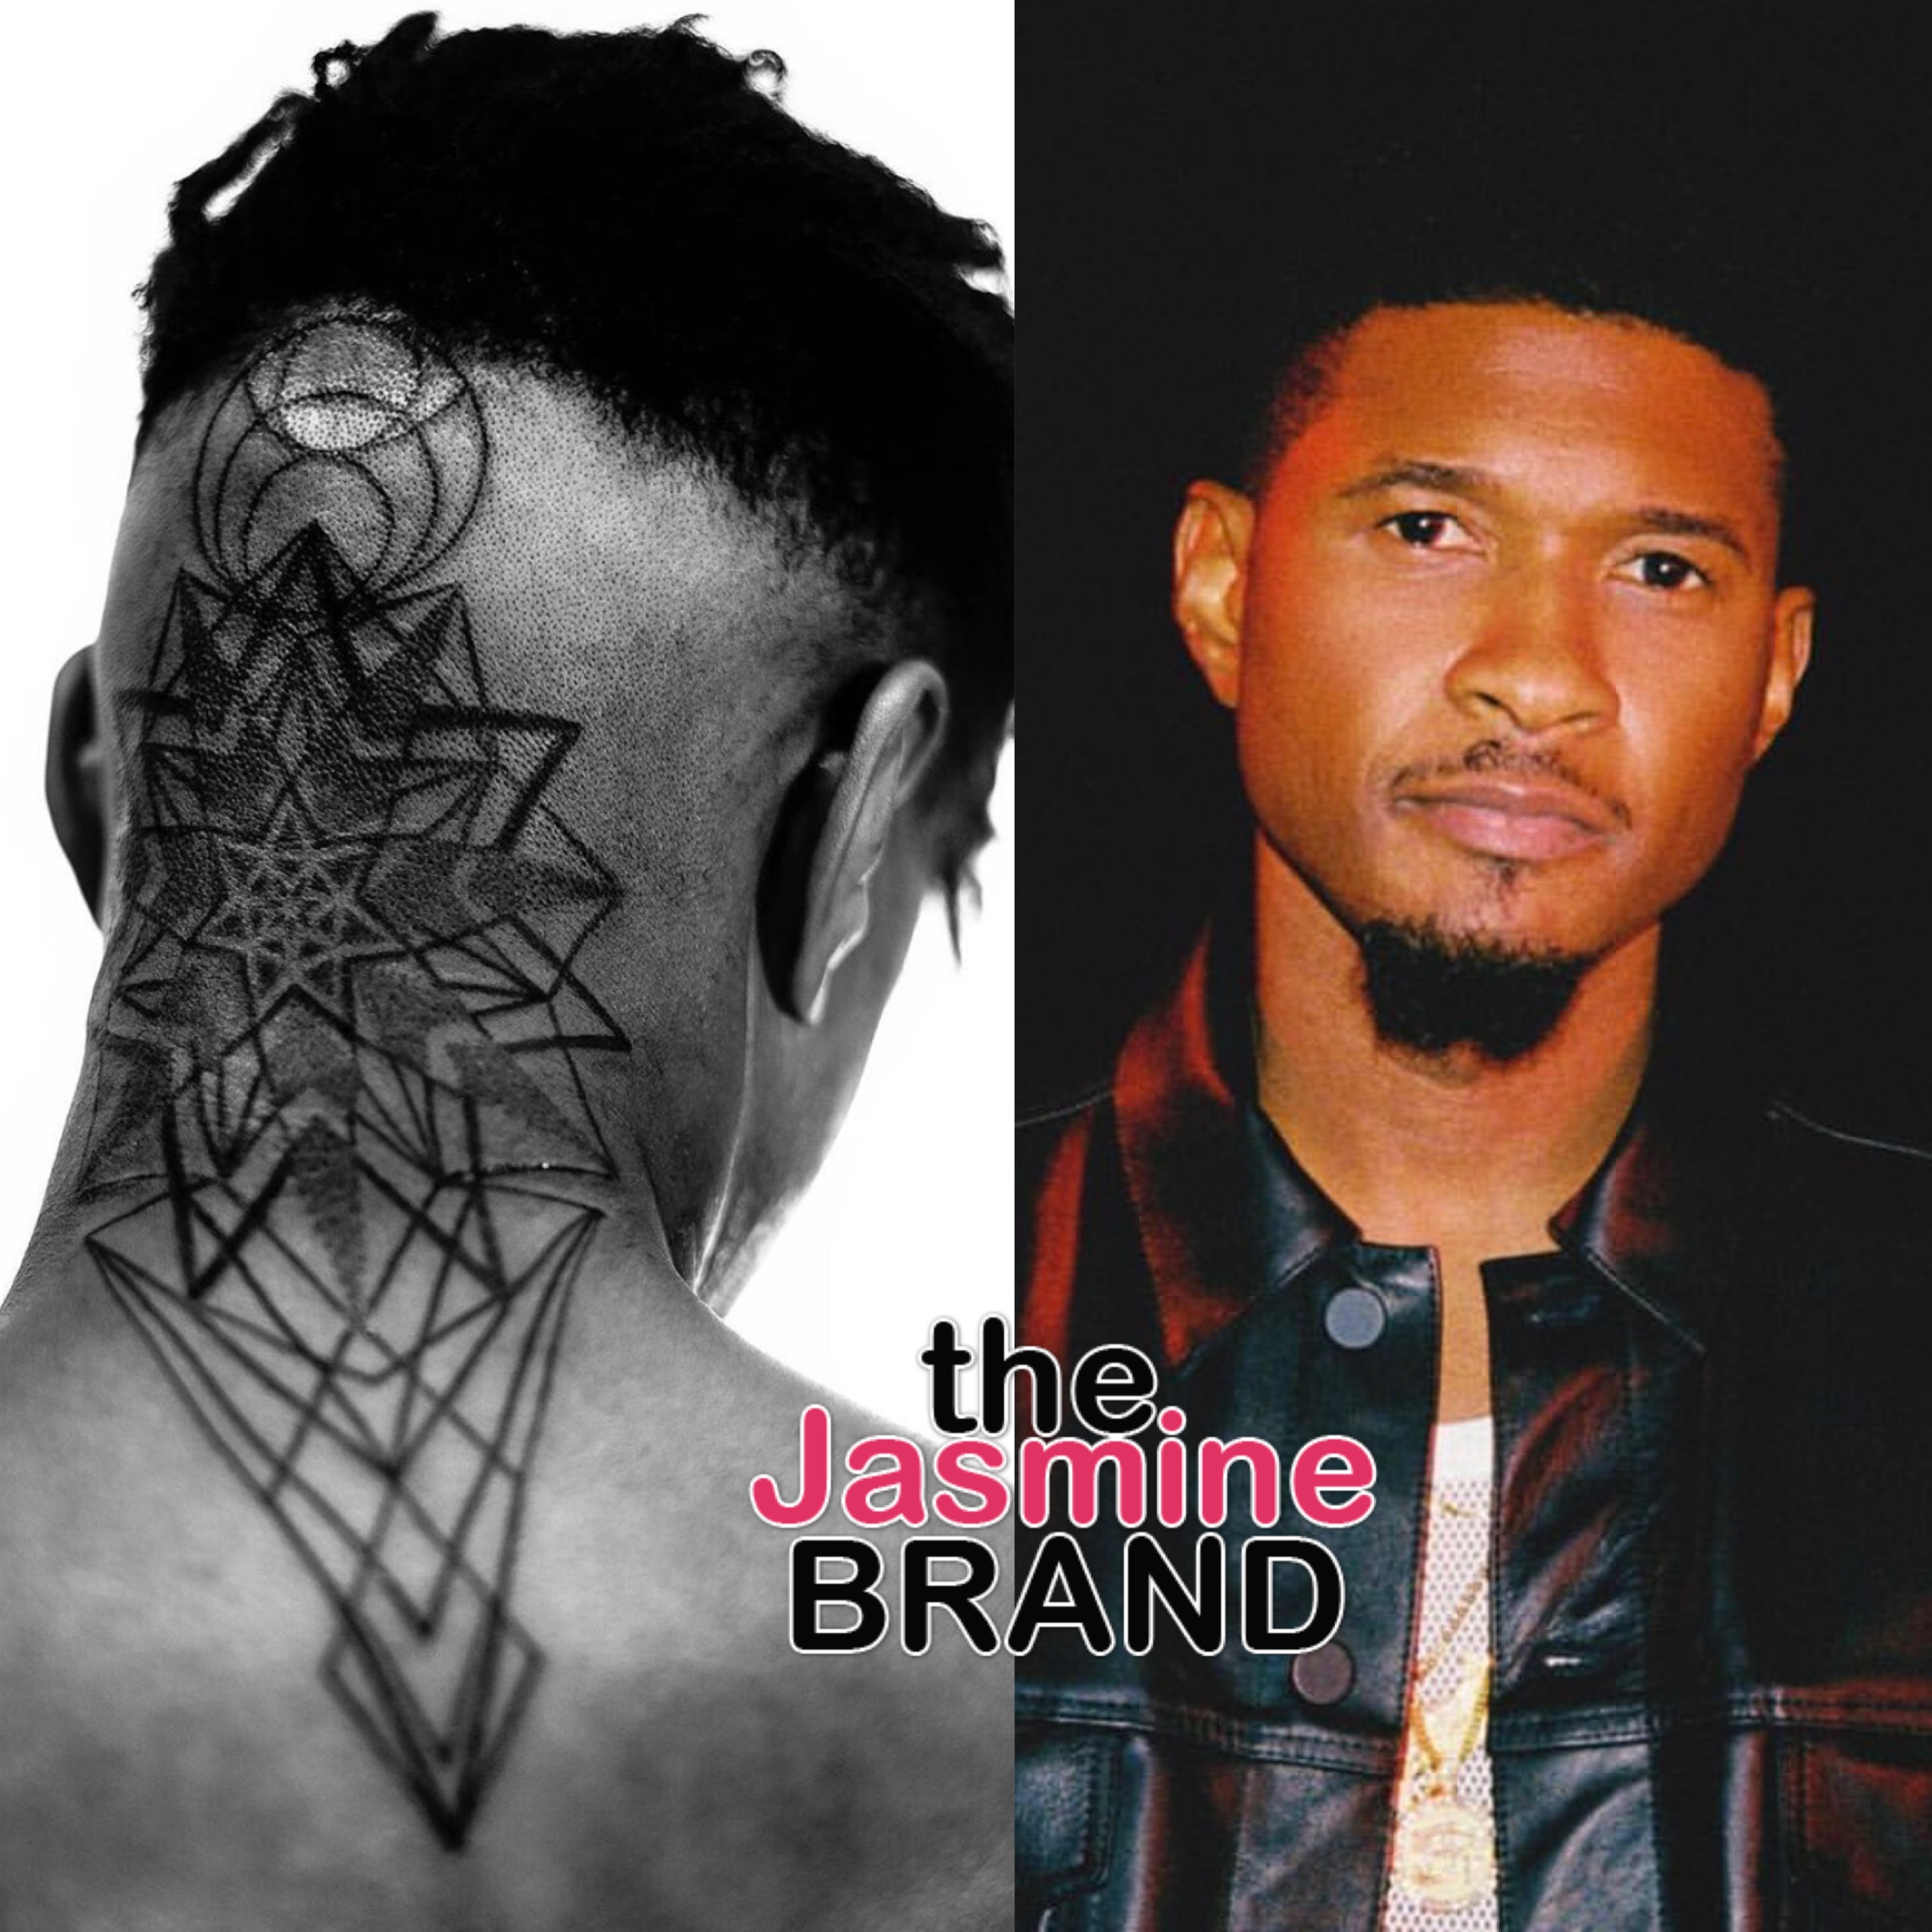 10 Most Liked Head Tattoo Designs for Men and Women